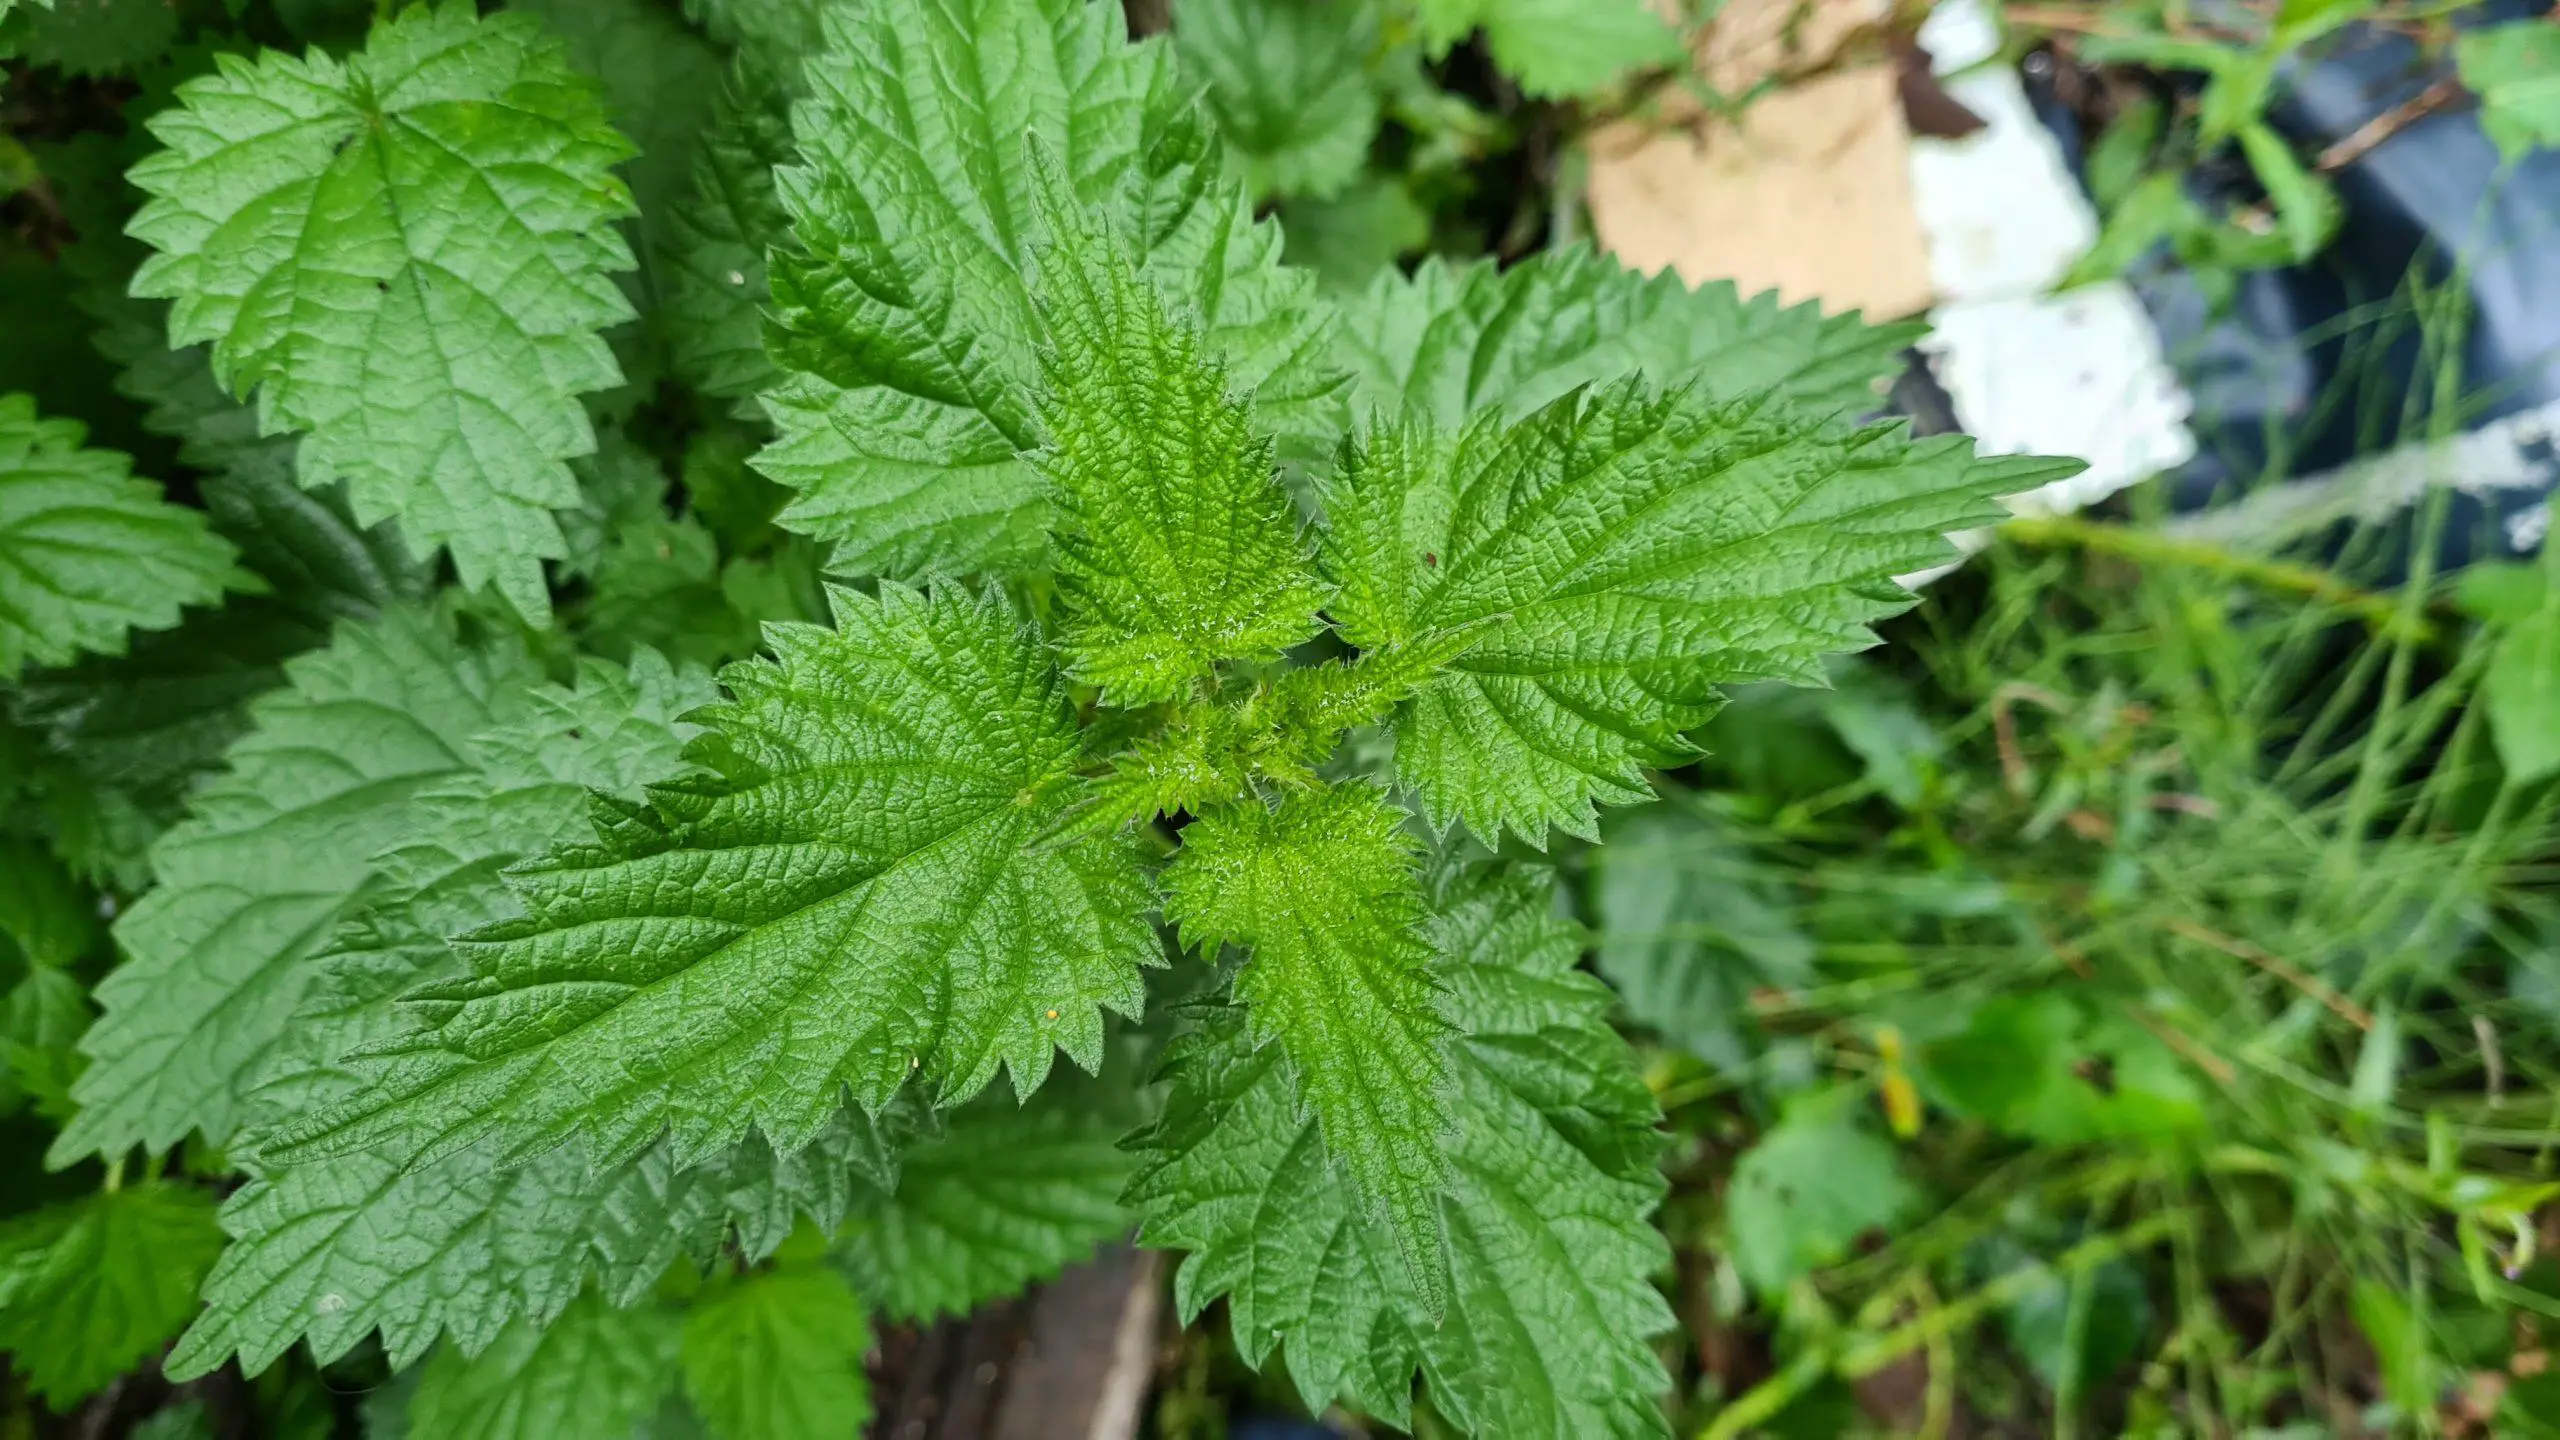 Common nettles grow wildly in clumps and mainly in gardens